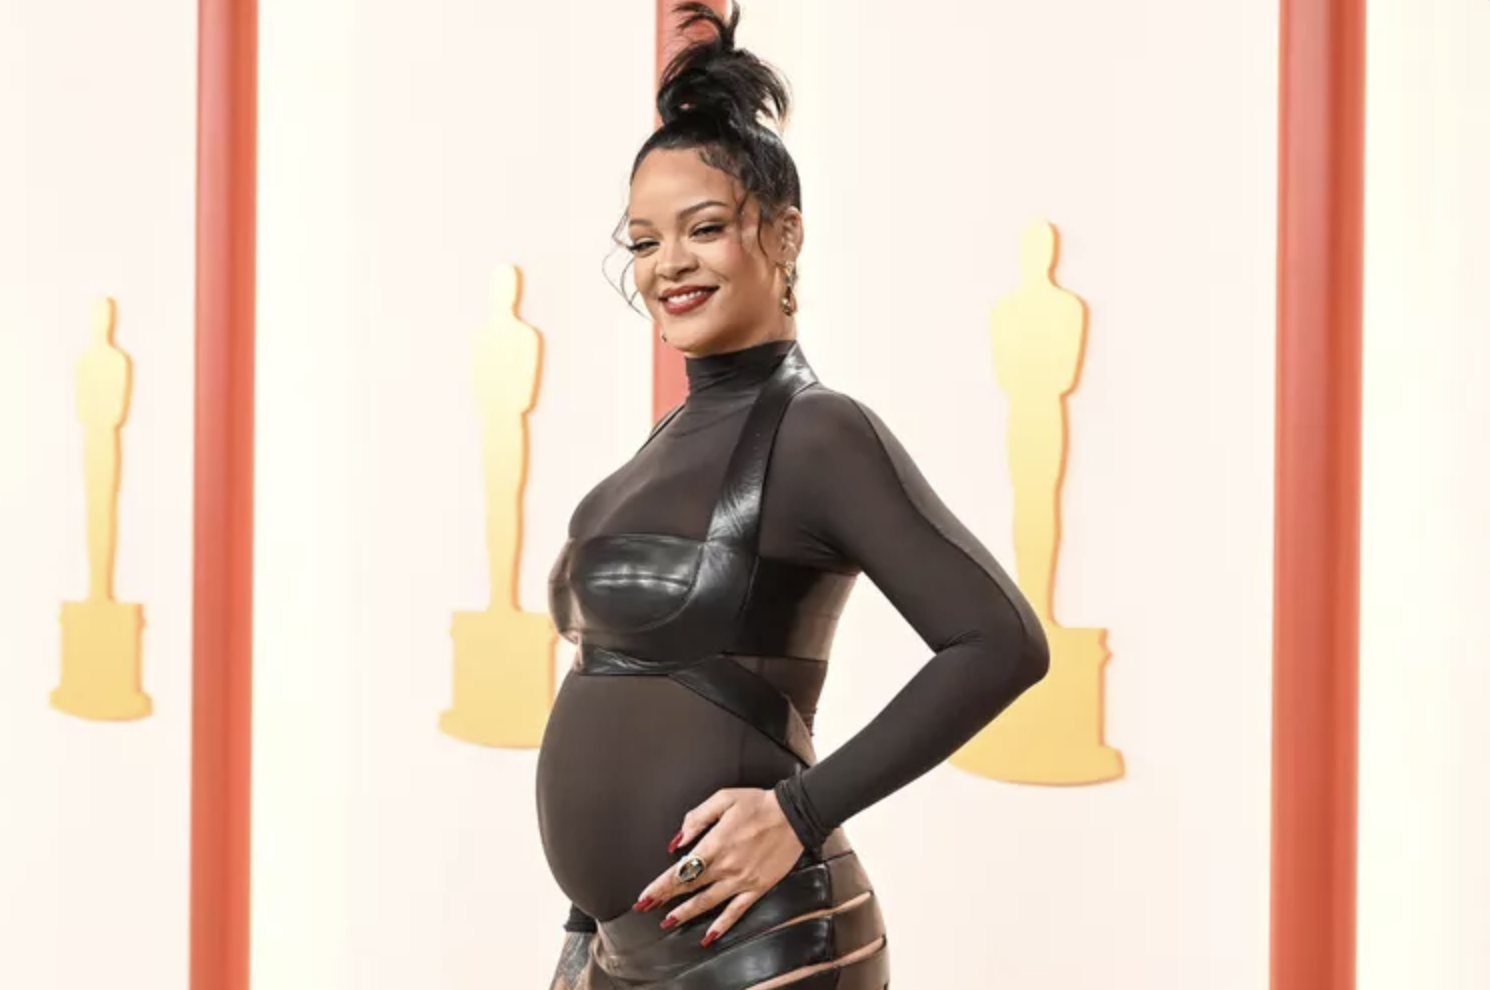 Rihanna Feels Her Family Is ‘Complete’ After Welcoming Baby No. 2